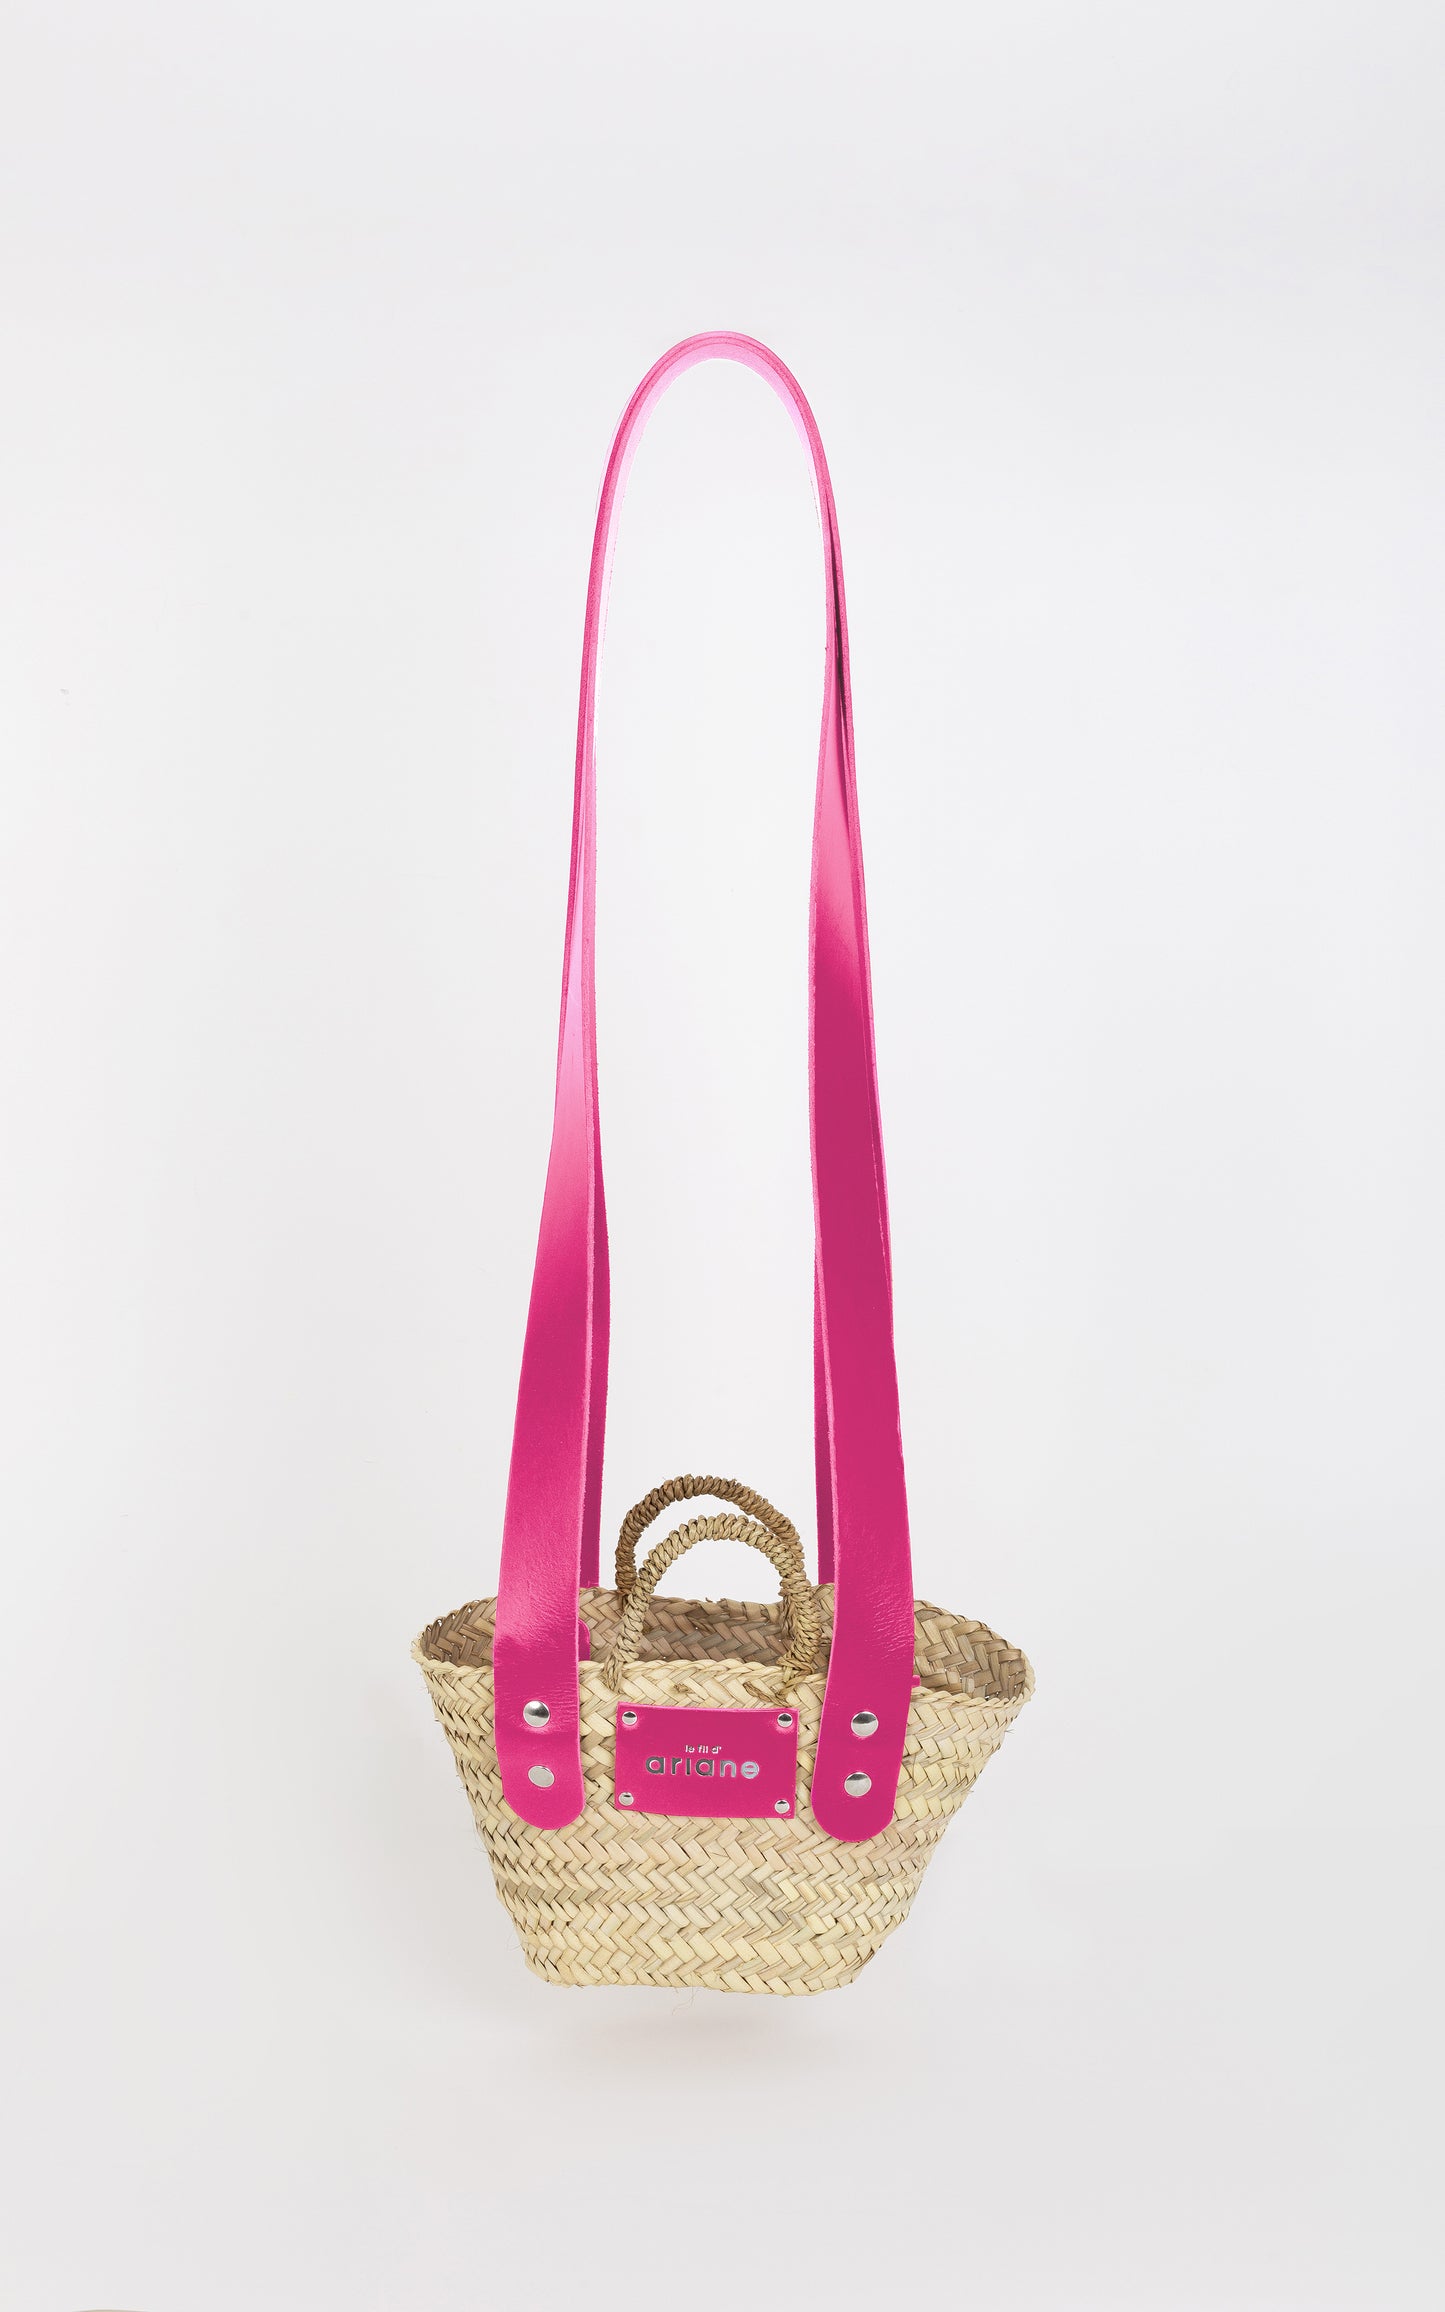 THESEE basket - Size XS - Large pink handles